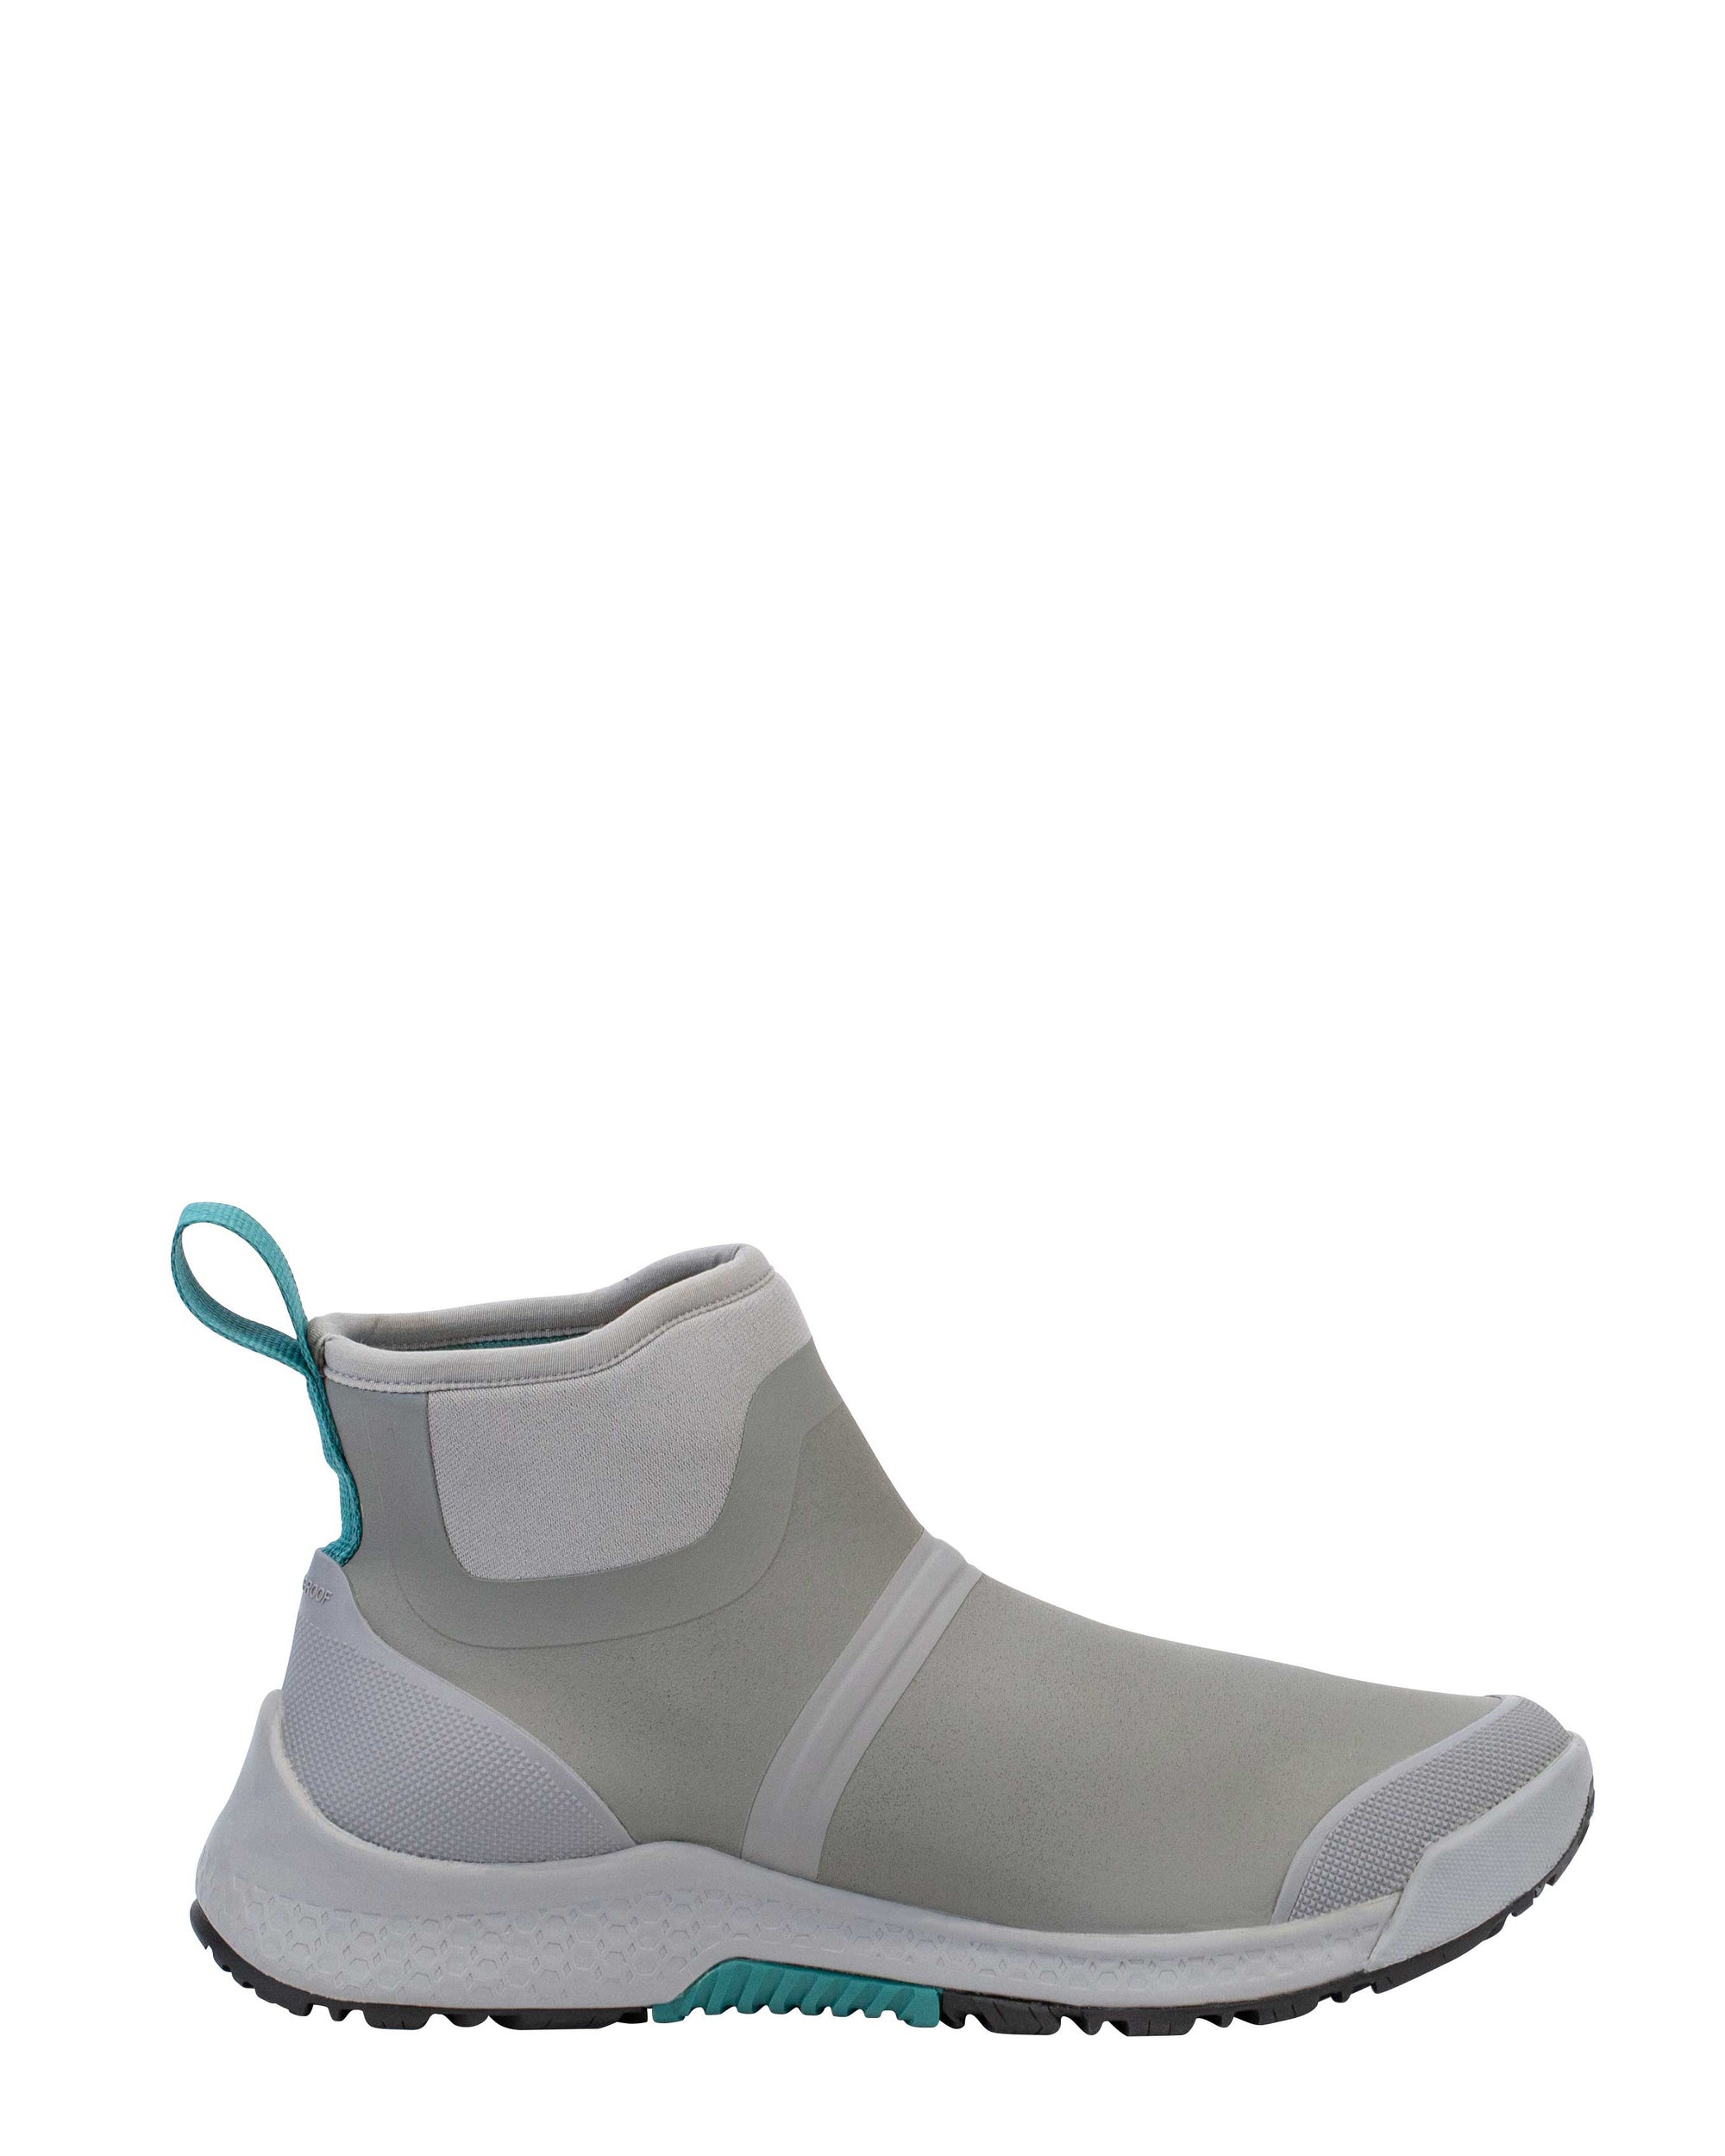 Outscape Chelsea Performance Gumboots Frost Gray